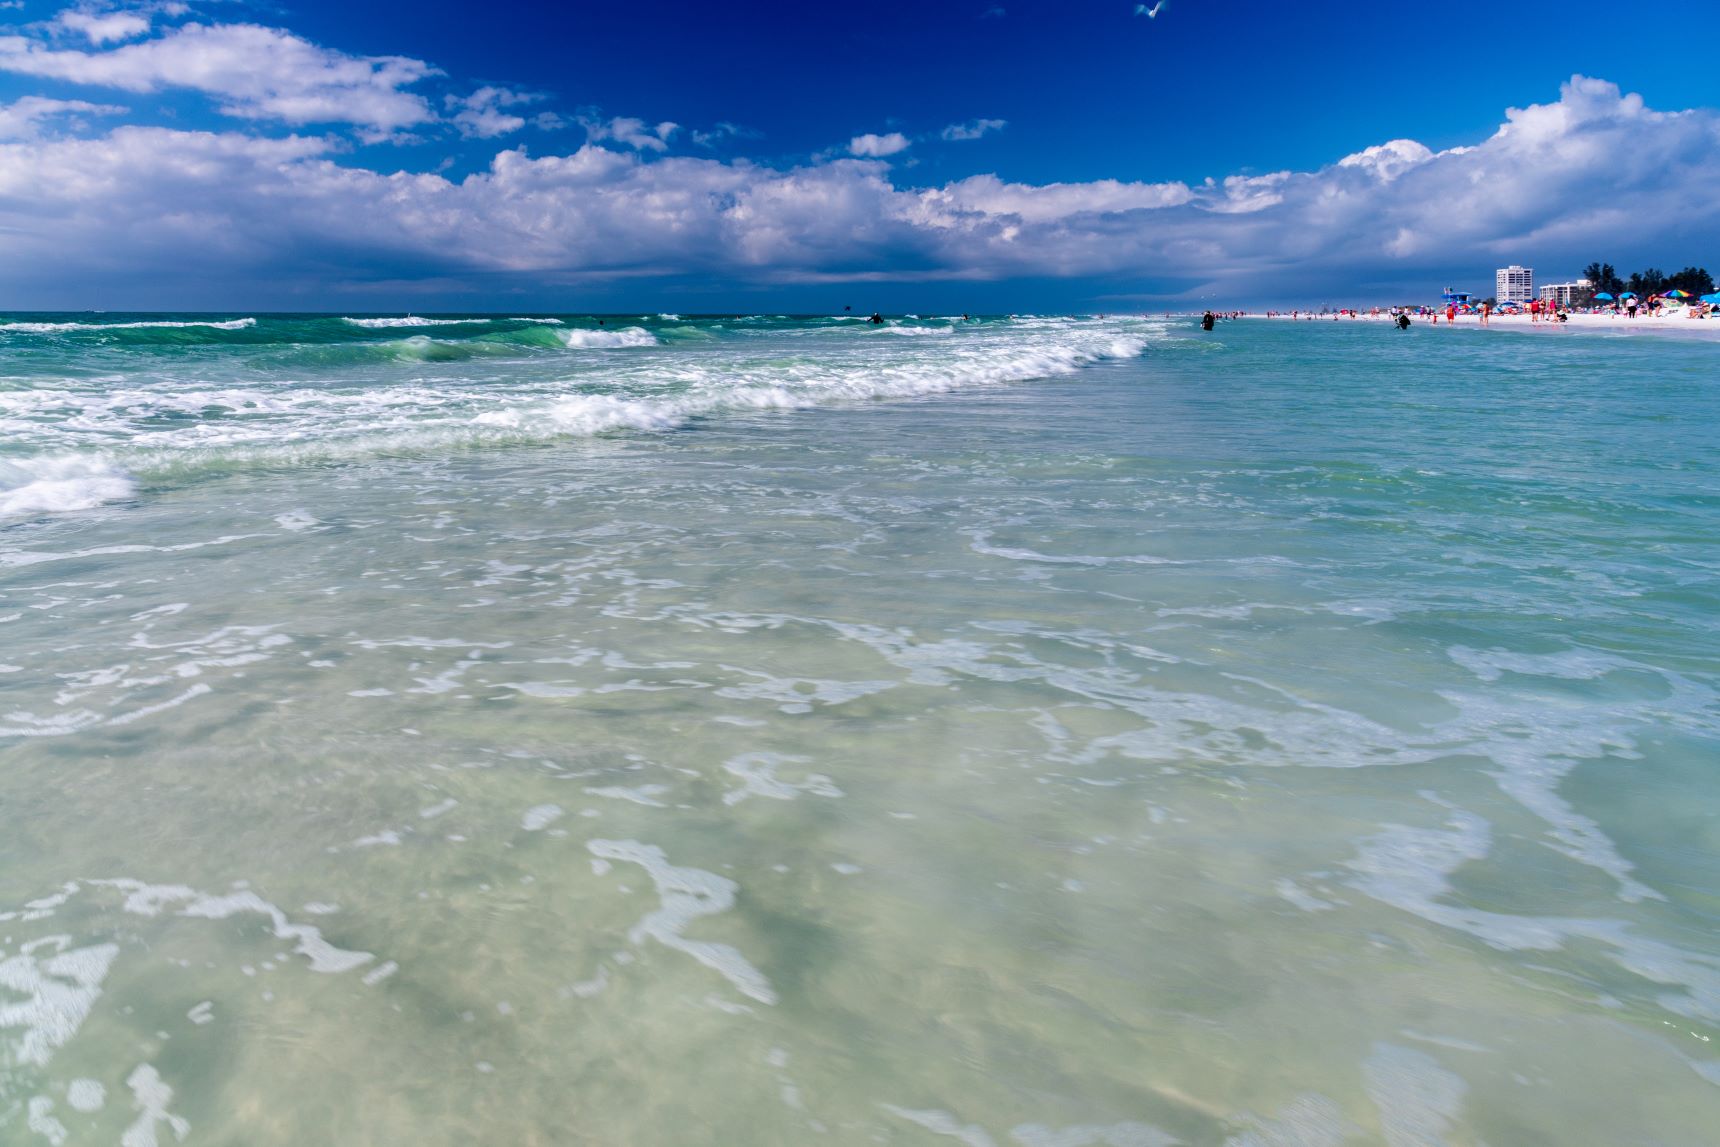 Siesta Key Tides are Among the Best in the World